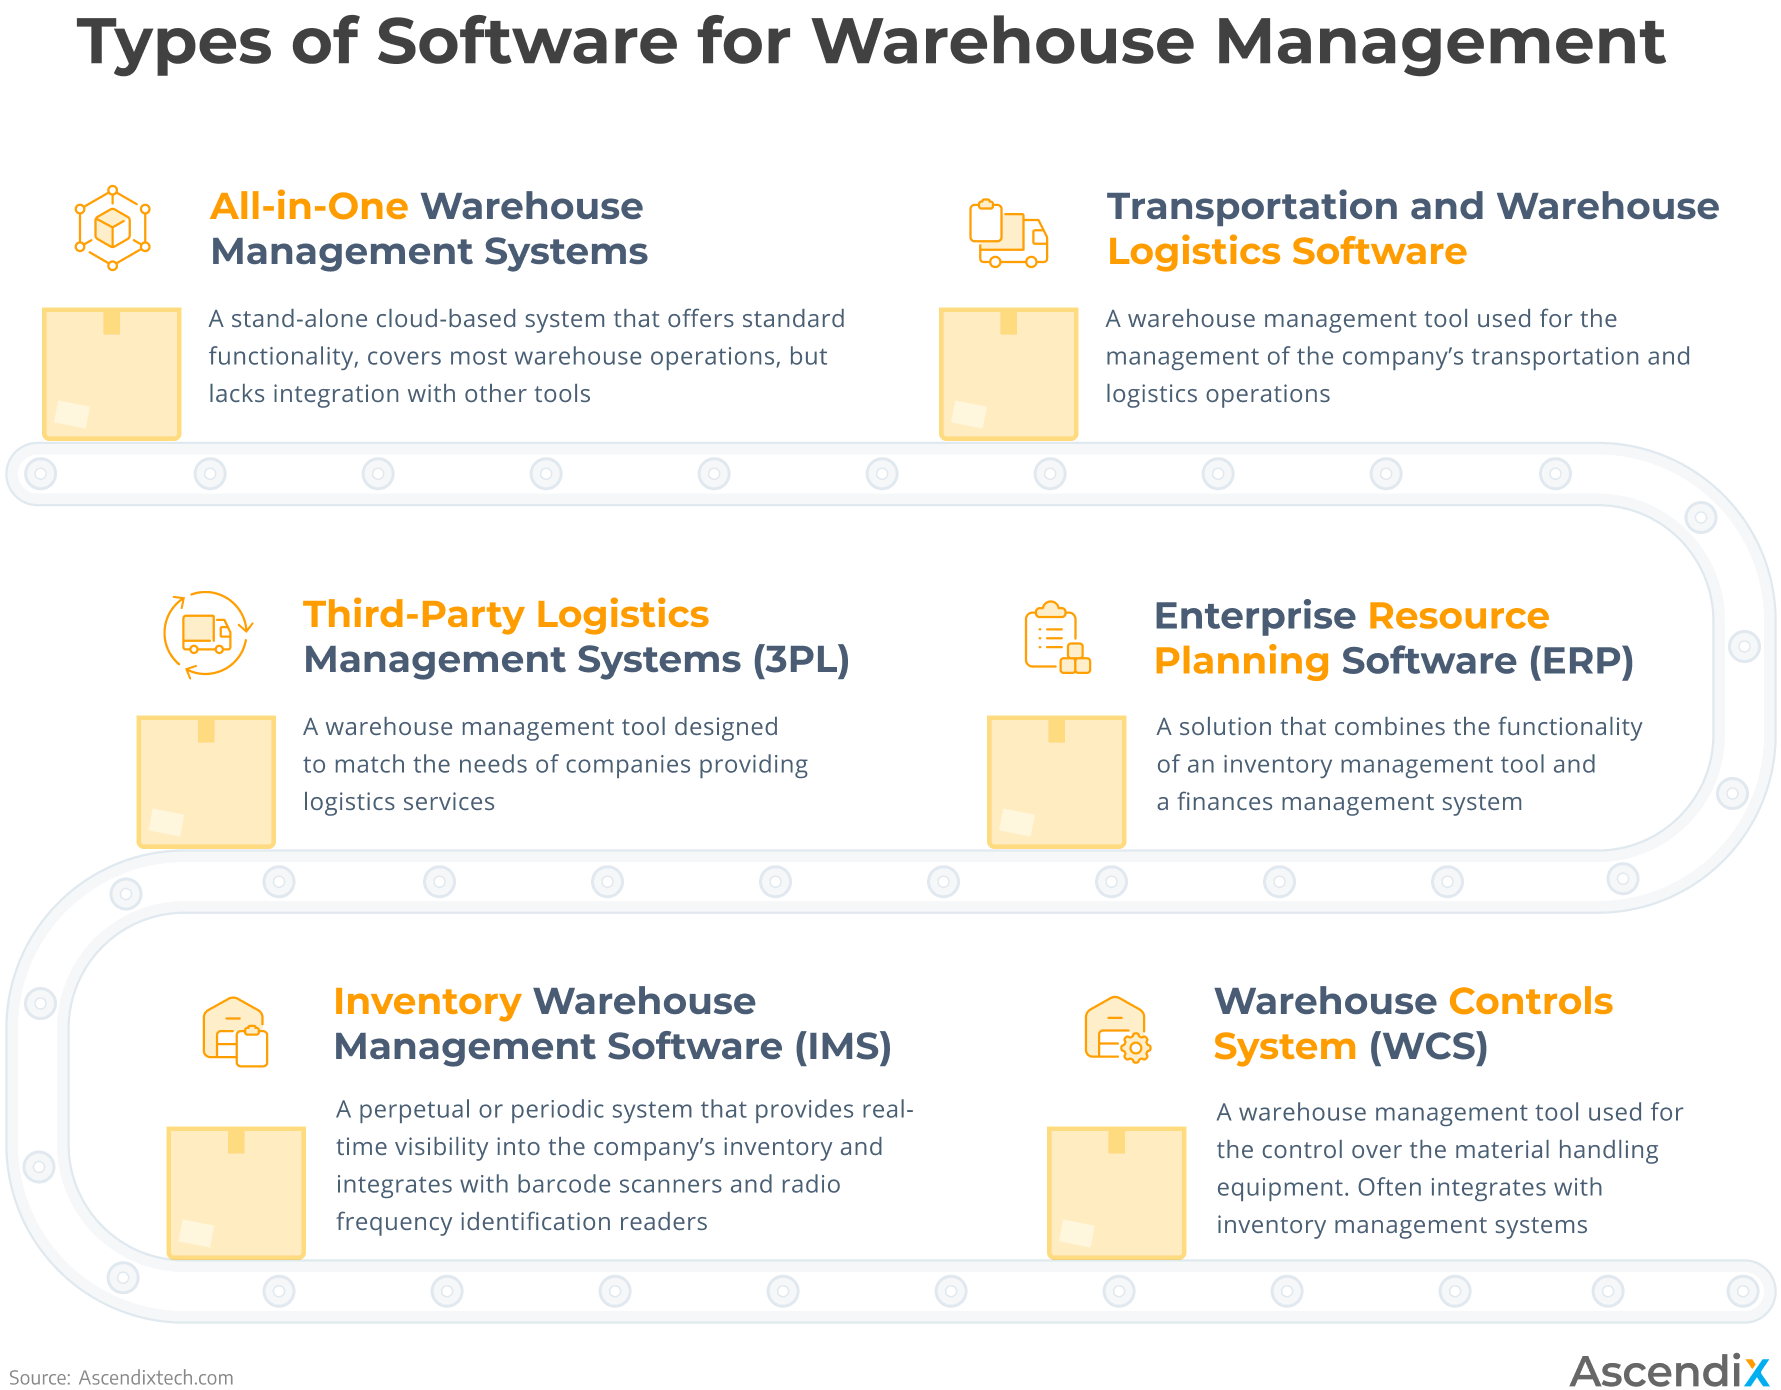 Types of Software for Warehouse Management